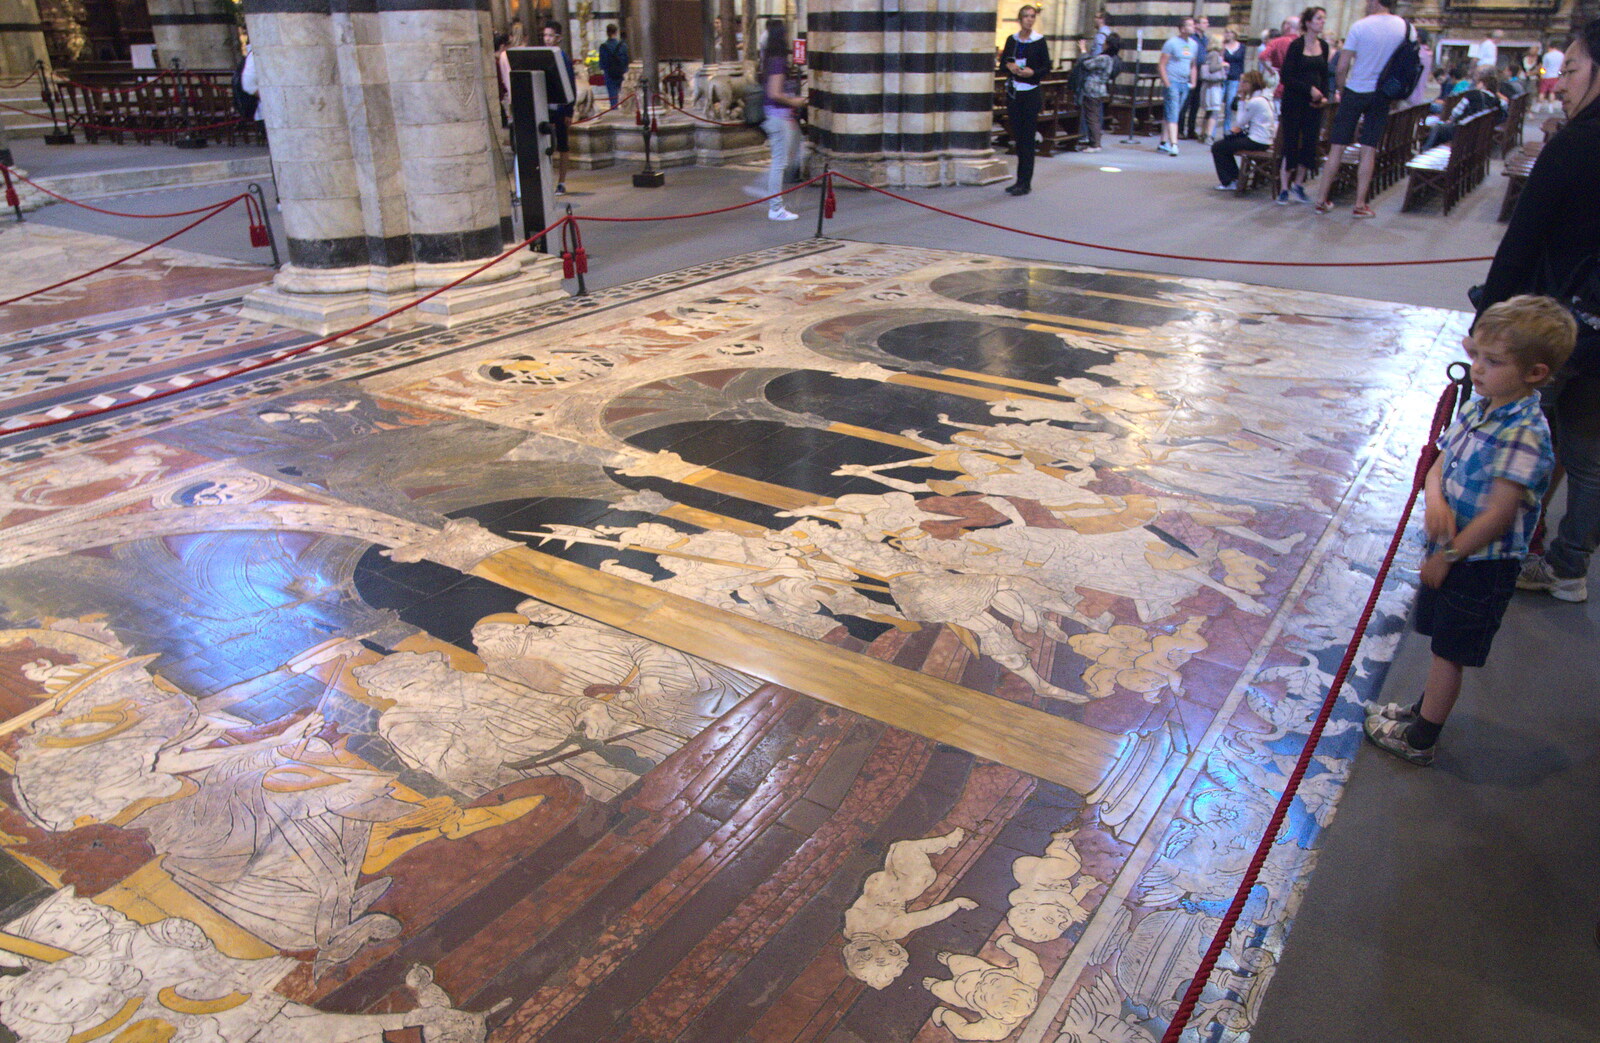 A Tuscan Winery and a Trip to Siena, Tuscany, Italy - 10th June 2013: Fred looks at floor marbles